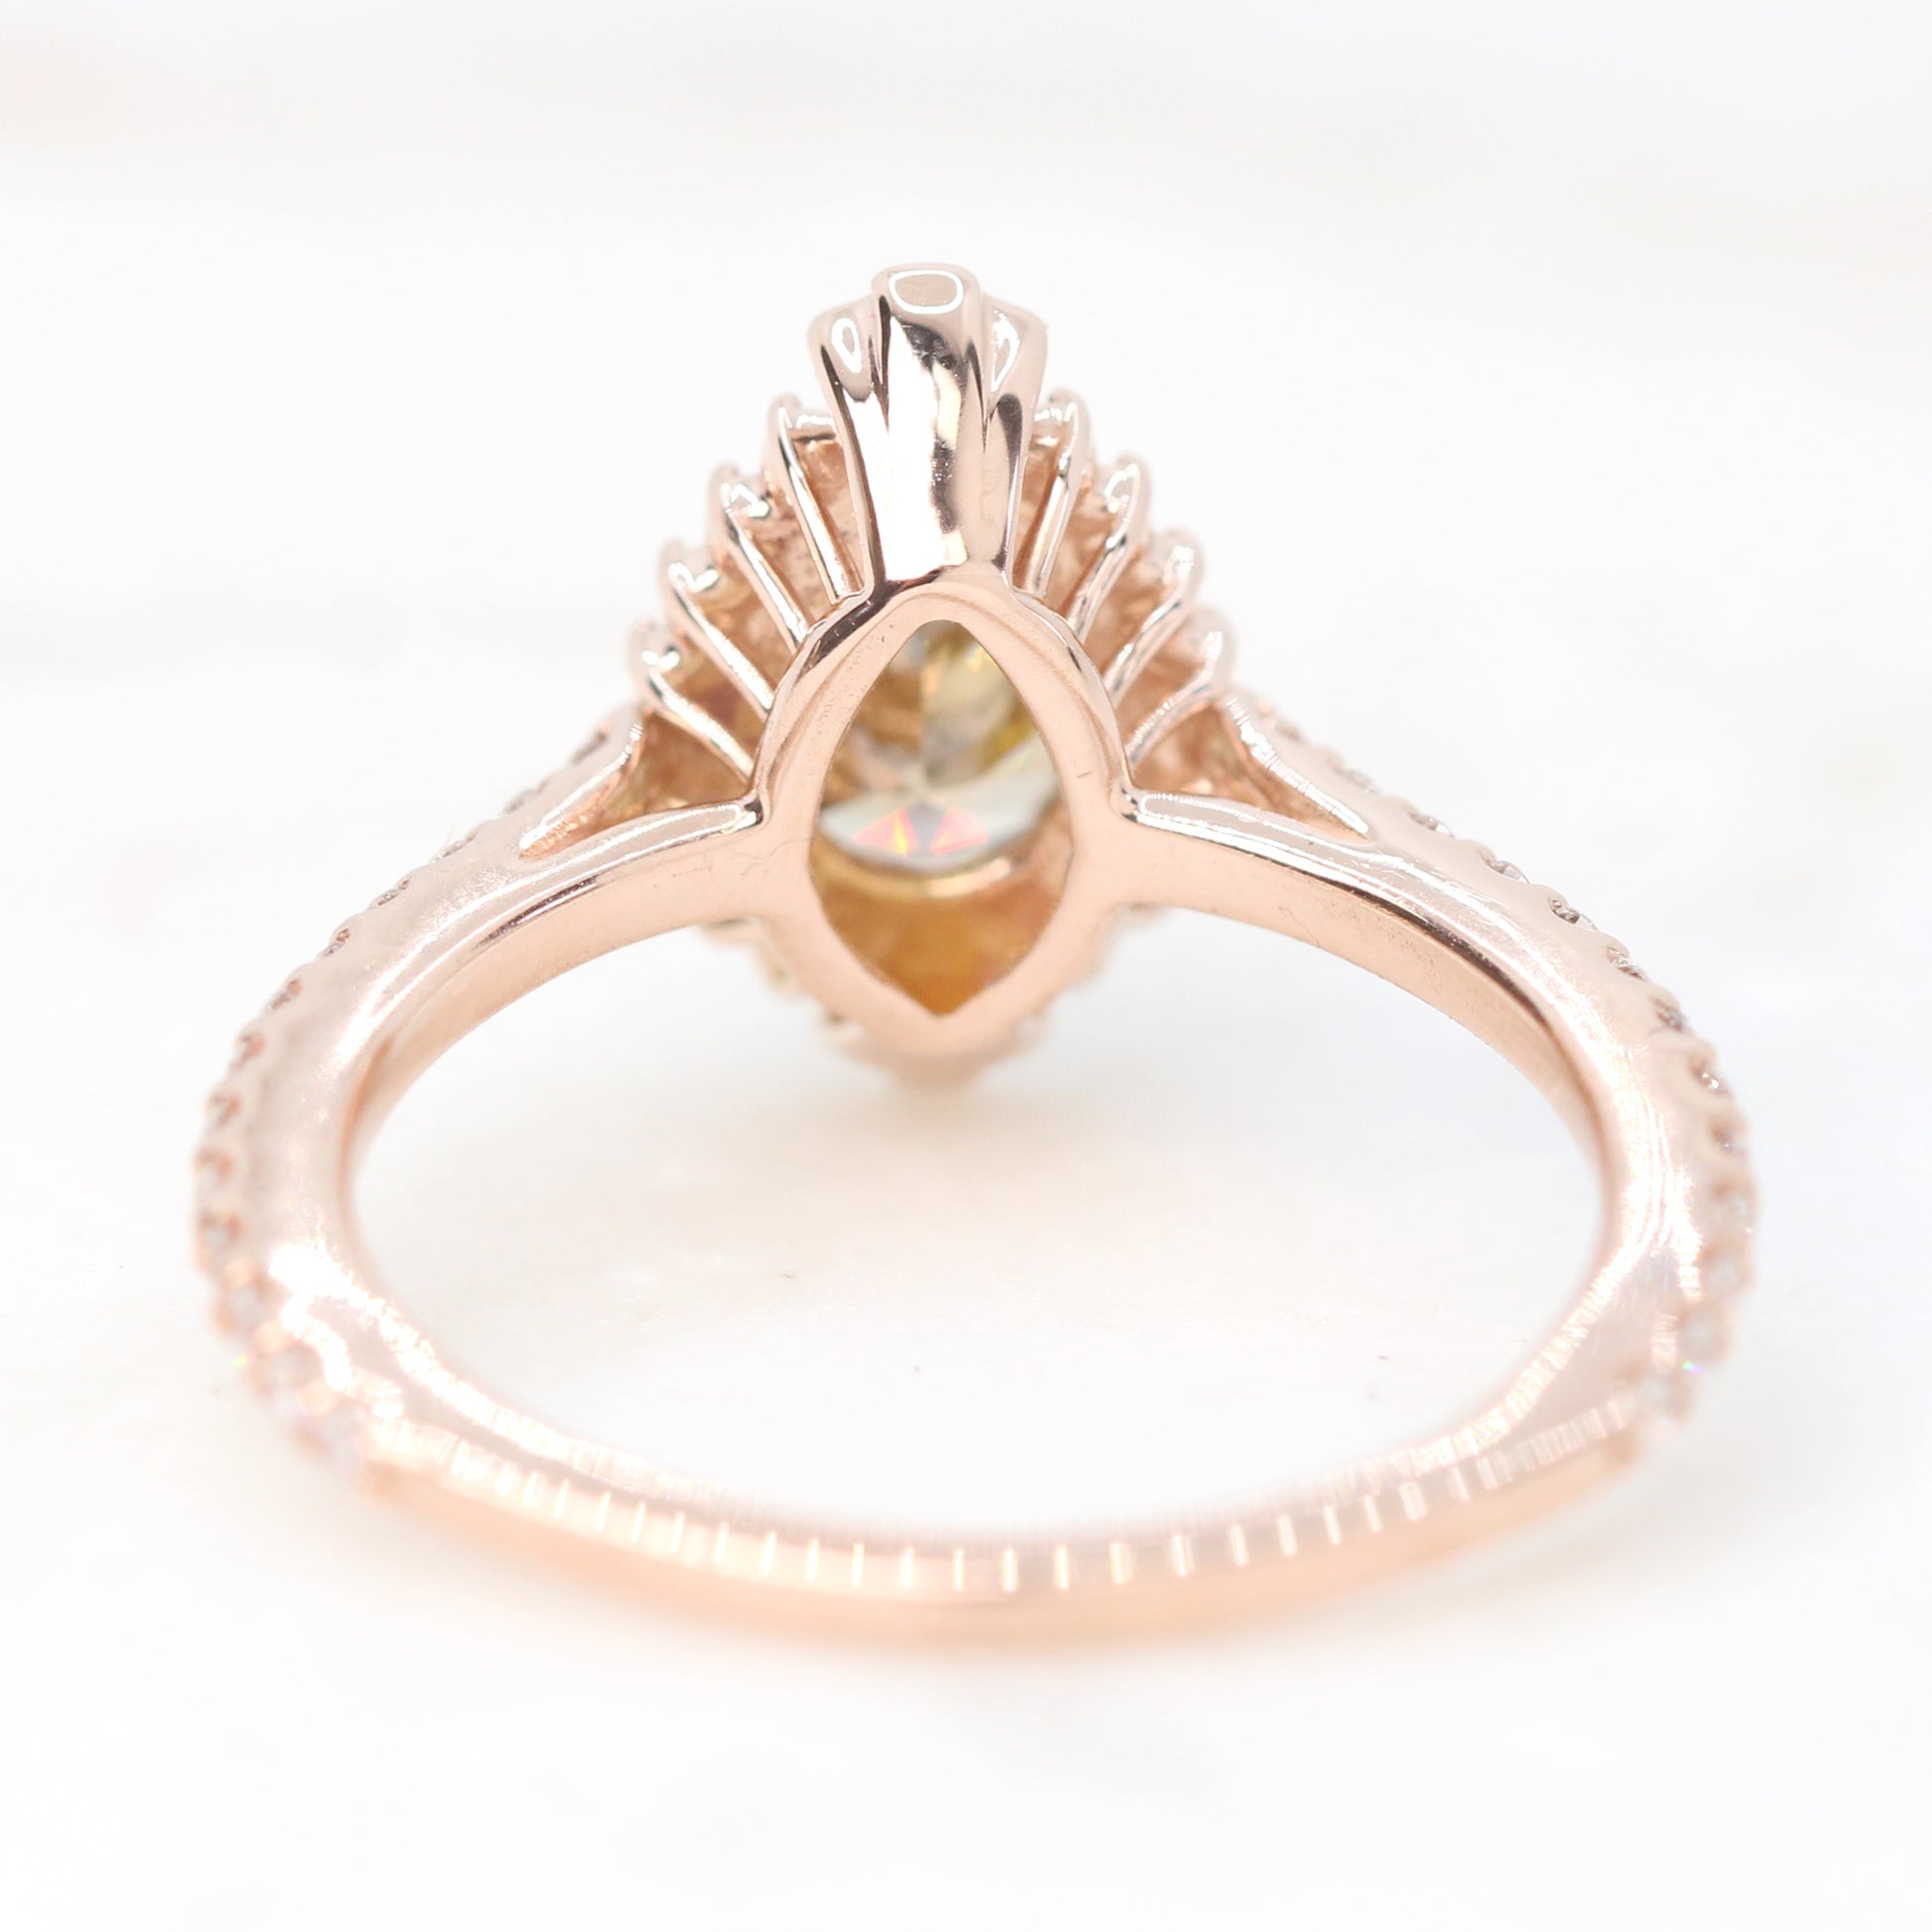 Tinsley Ring with a 1.01 Carat Pear Champagne Salt and Pepper Diamond and White Accent Diamonds in 14k Rose Gold - Ready to Size and Ship - Midwinter Co. Alternative Bridal Rings and Modern Fine Jewelry